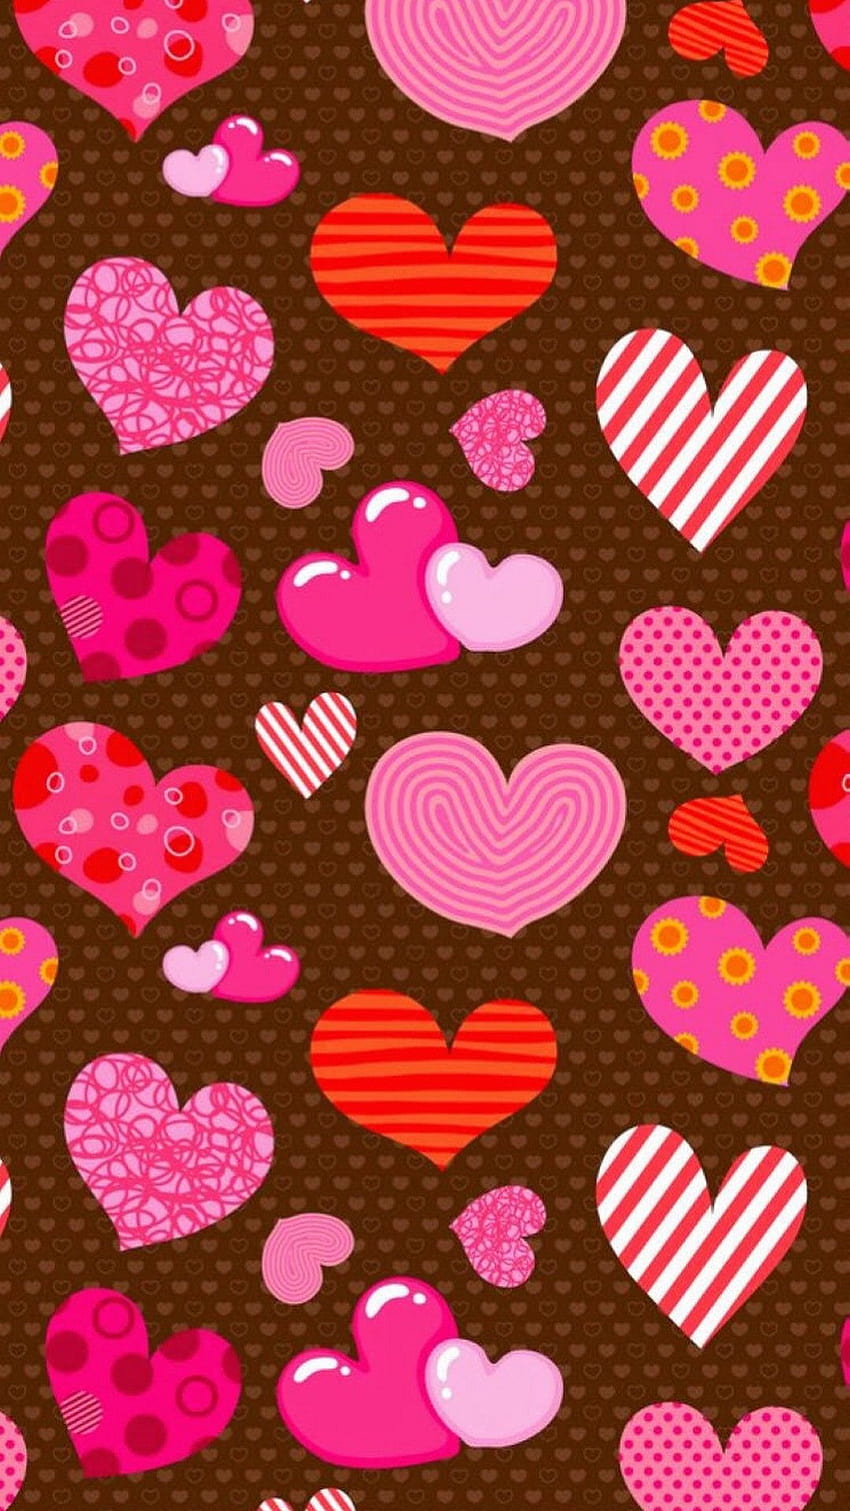 28 Valentines Aesthetic ideas  valentines wallpaper iphone wallpaper  cute wallpapers